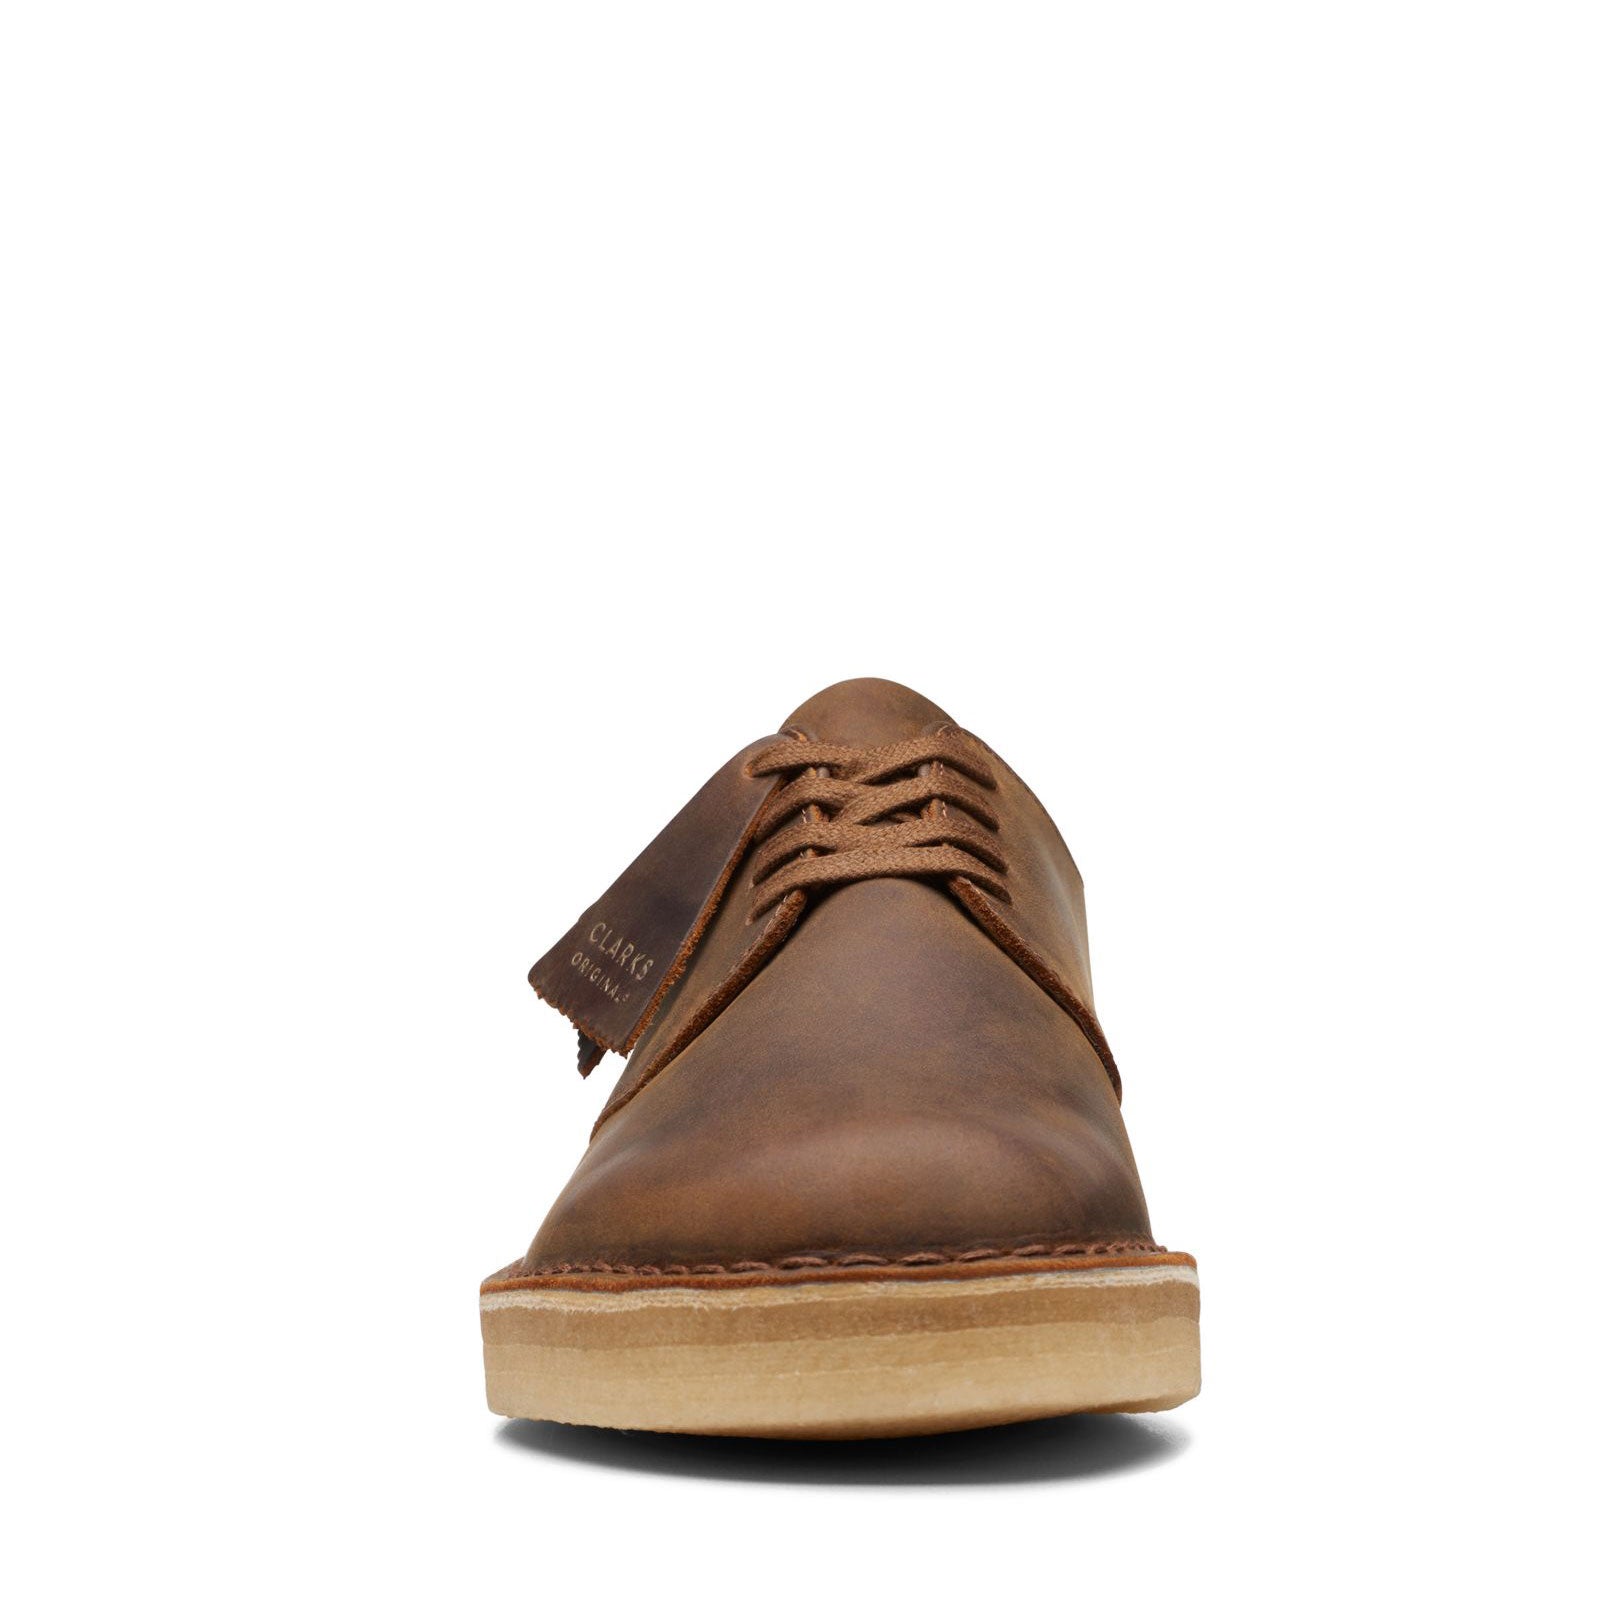 Clarks 71493 (Beeswax) Milano Shoes